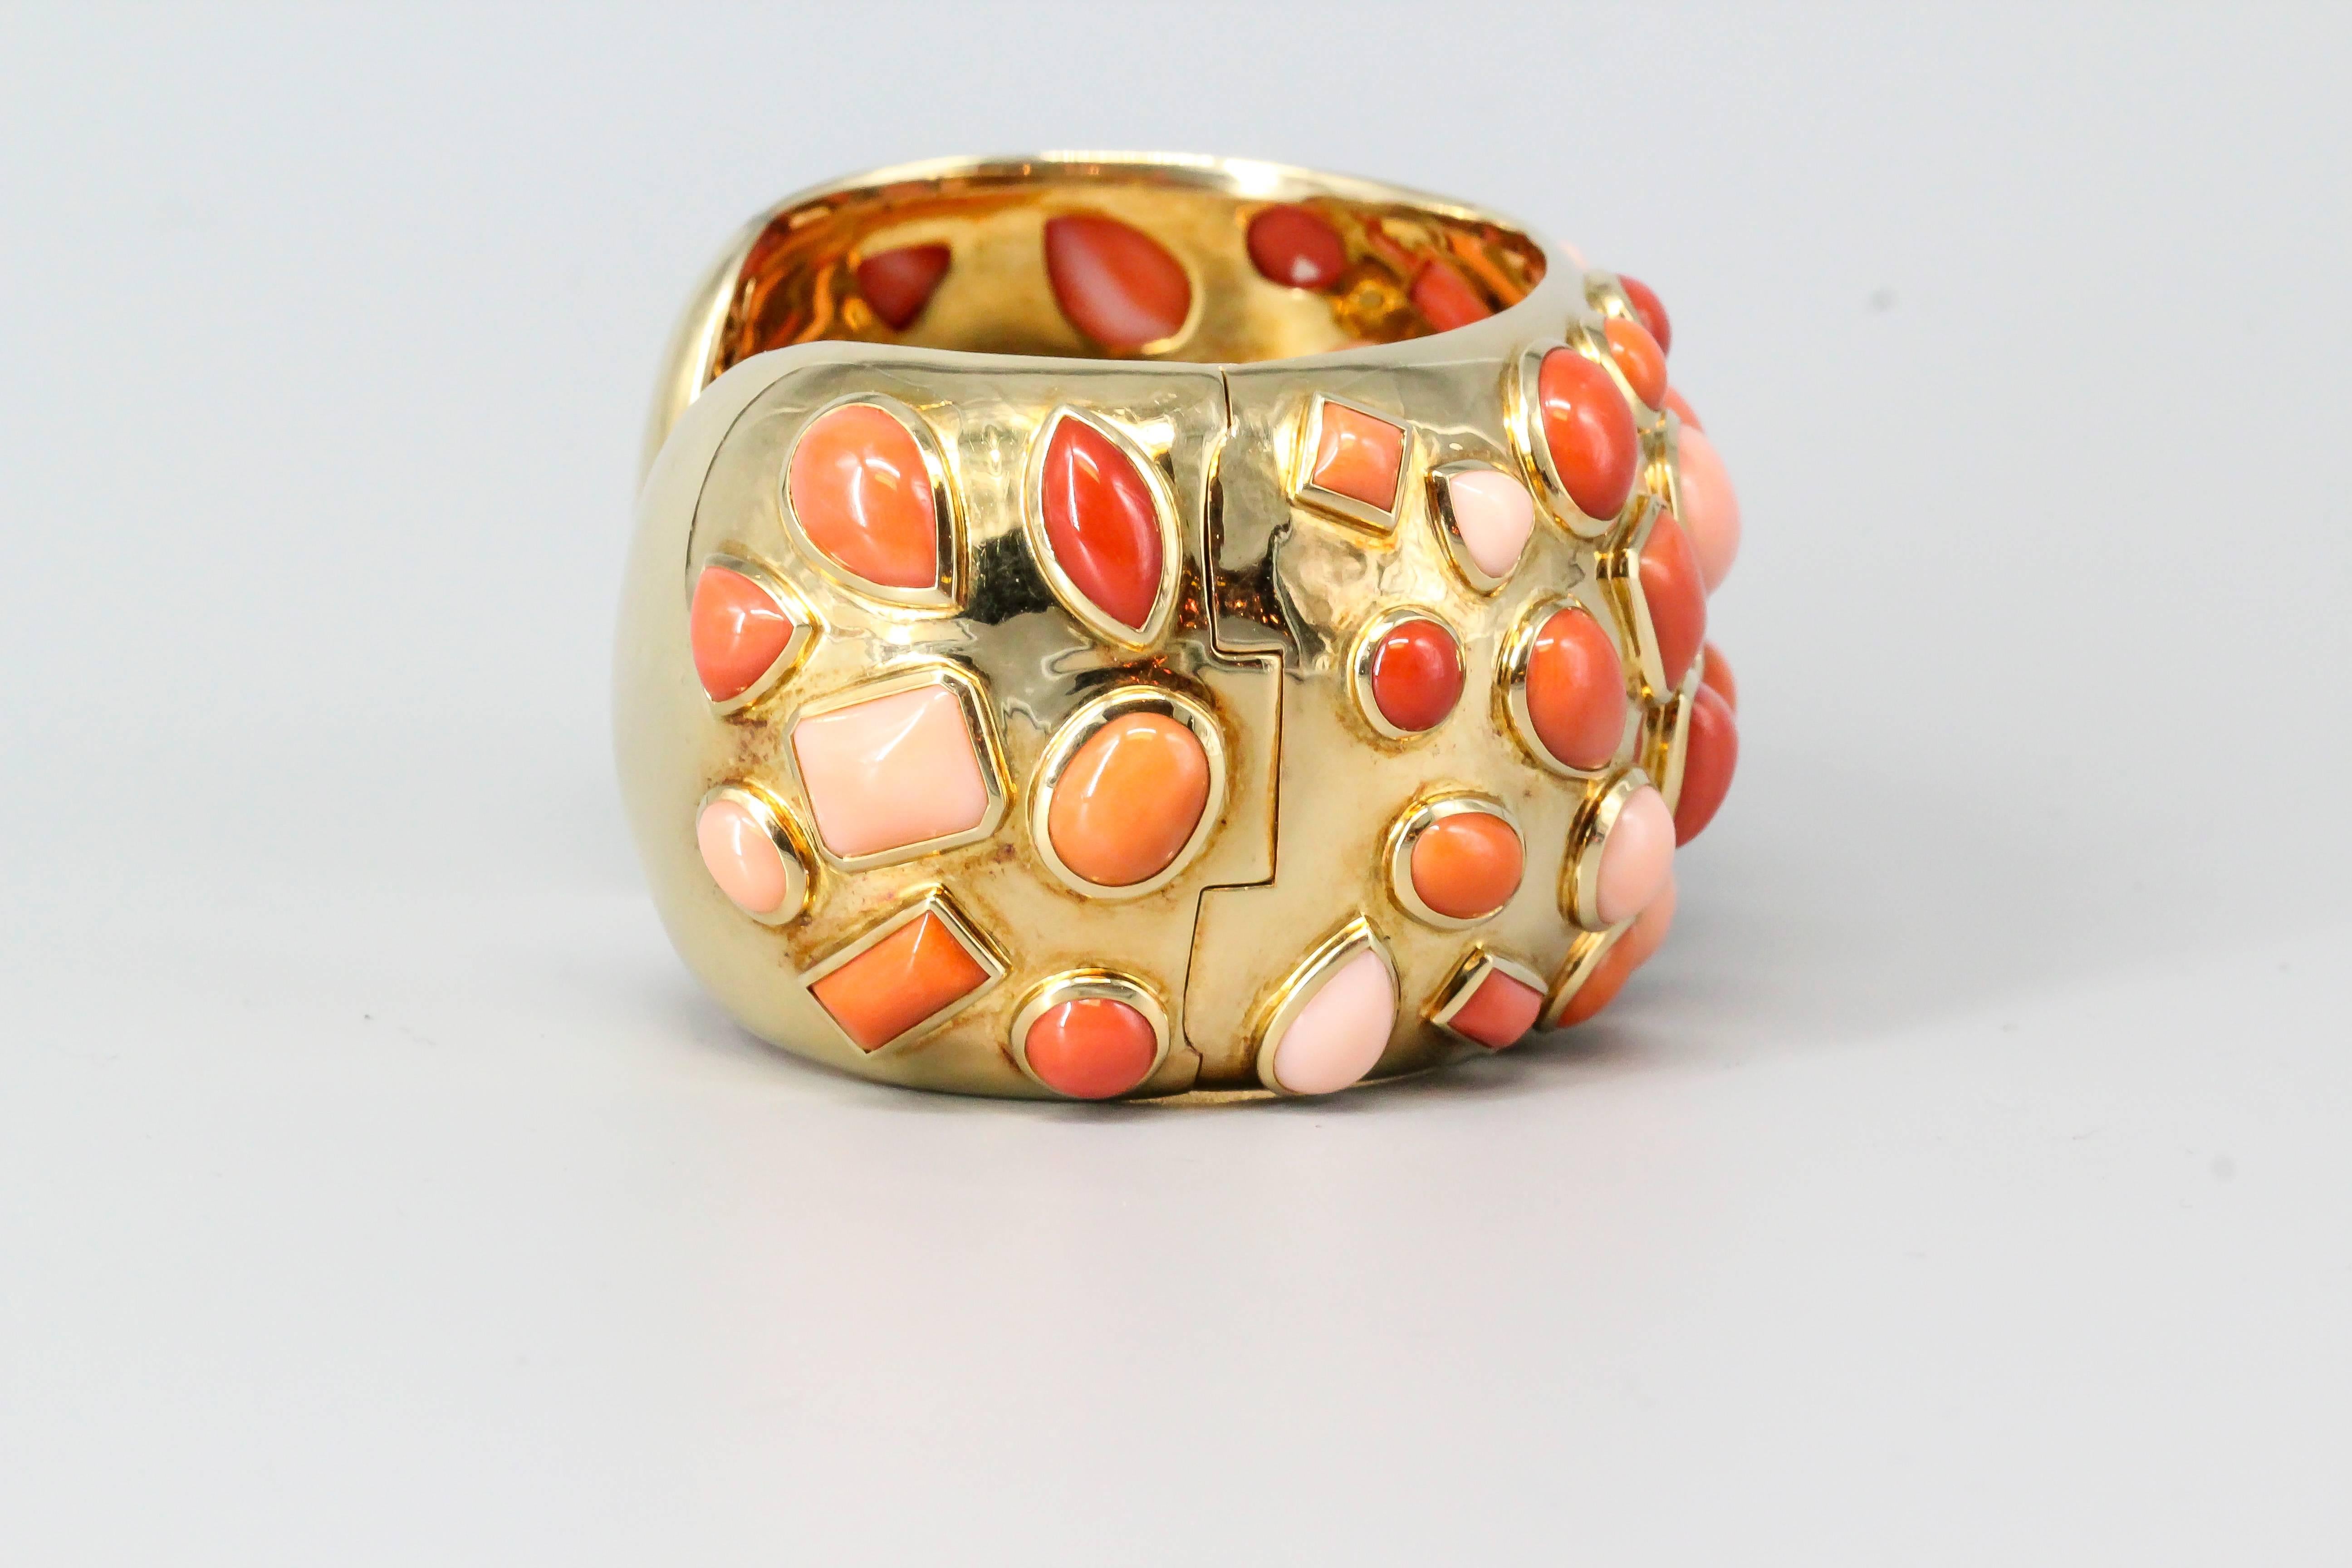 Vibrant coral and 18K yellow gold cuff bracelet from the "Fifties" collection, by Seaman Schepps. It features various geometric shaped inserts with different shades of coral pieces, from lighter to darker. Highly ornate and intricate with